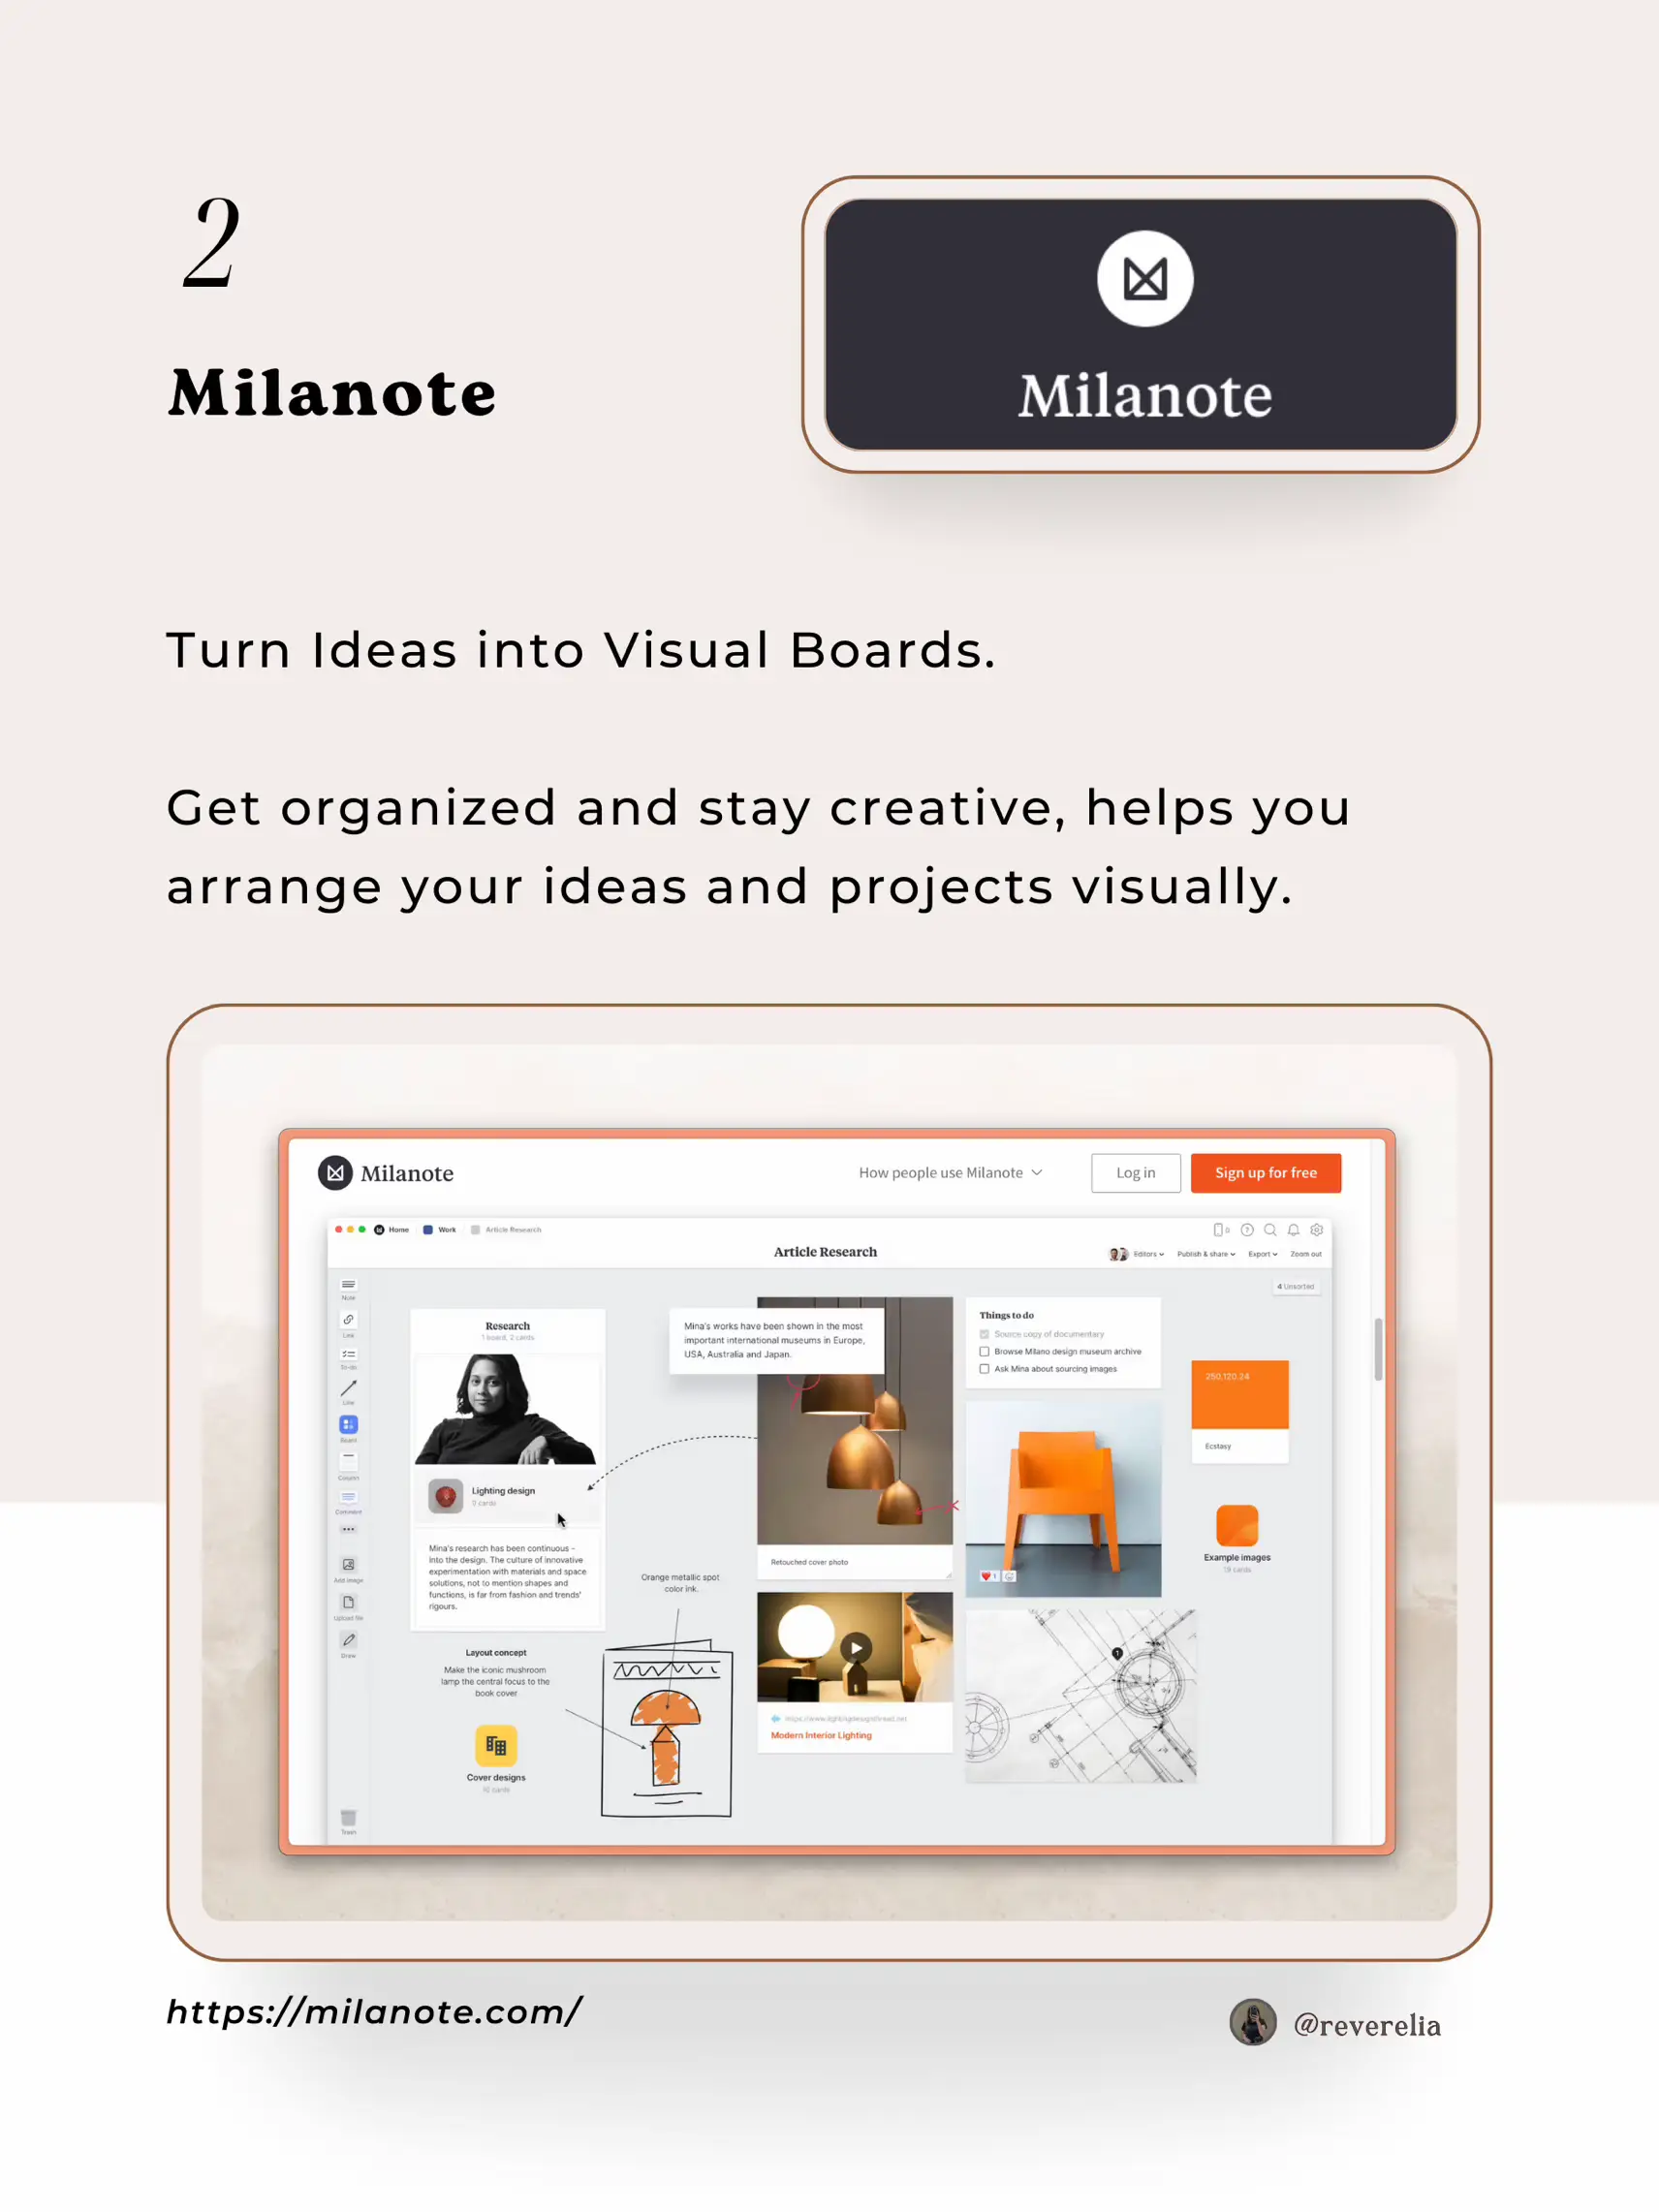 Download the Milanote mobile apps for free